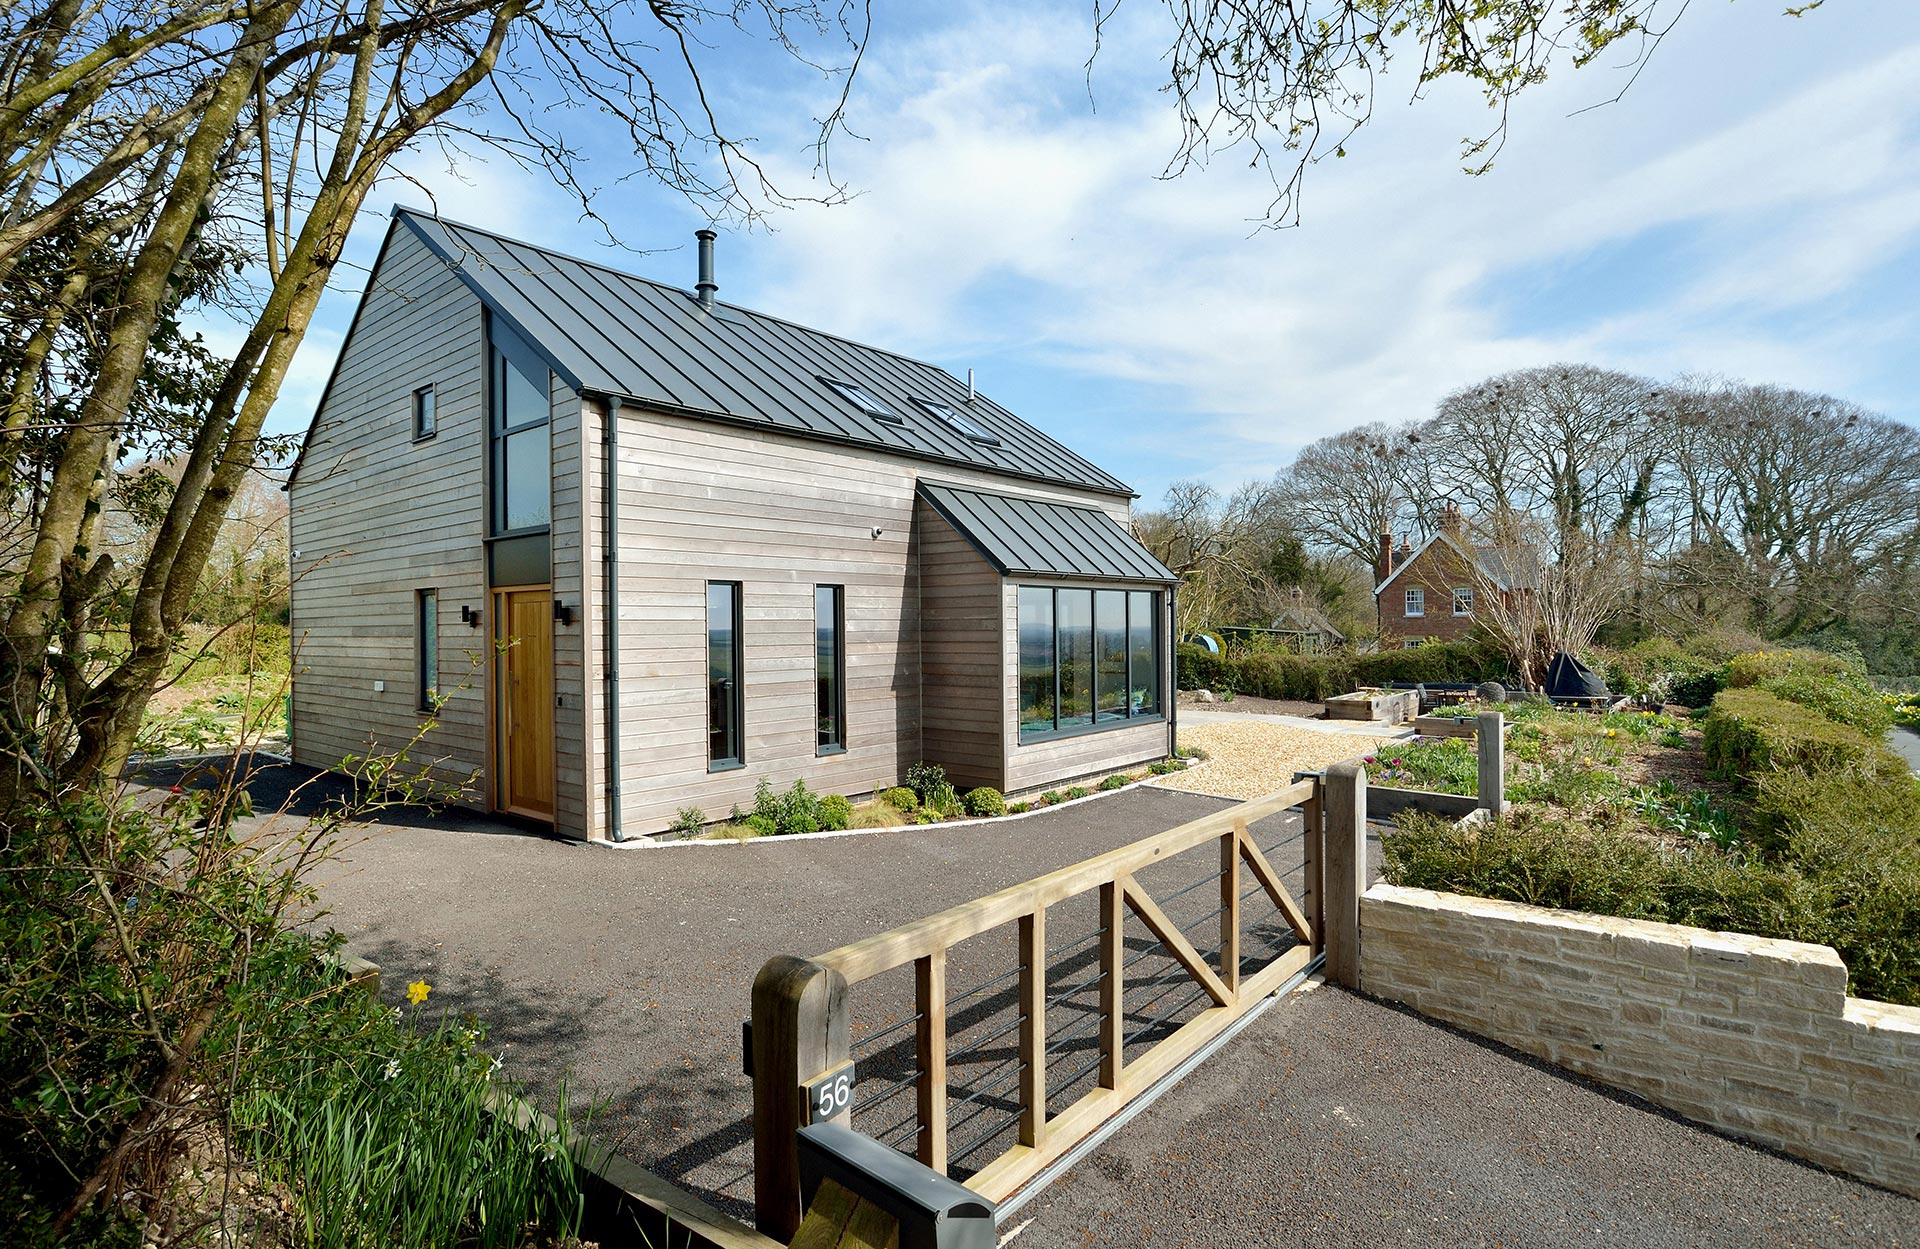 Modern rural house with timber cladding and metal roof view from entrance way